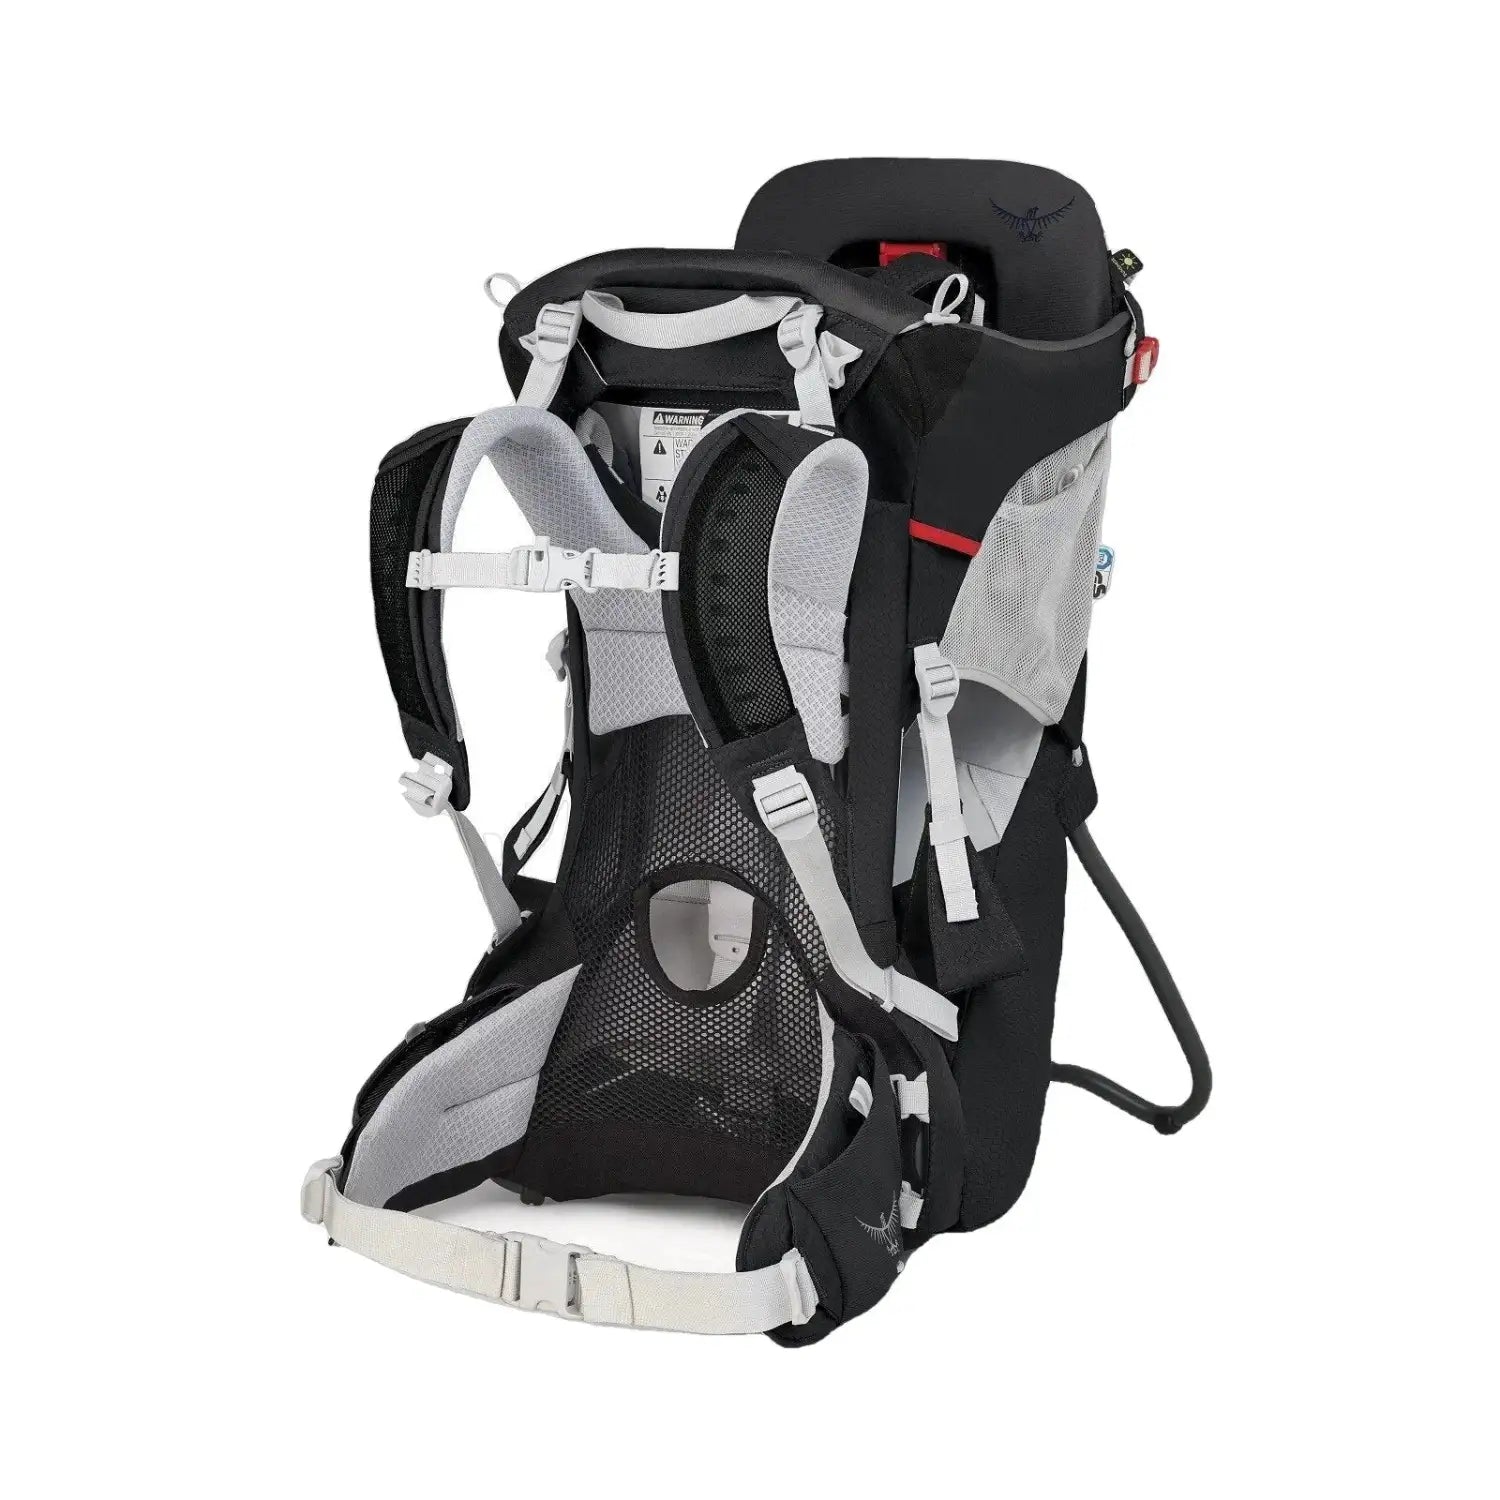 Osprey POCO® Child Carrier shown in Starry Black color option. Front view